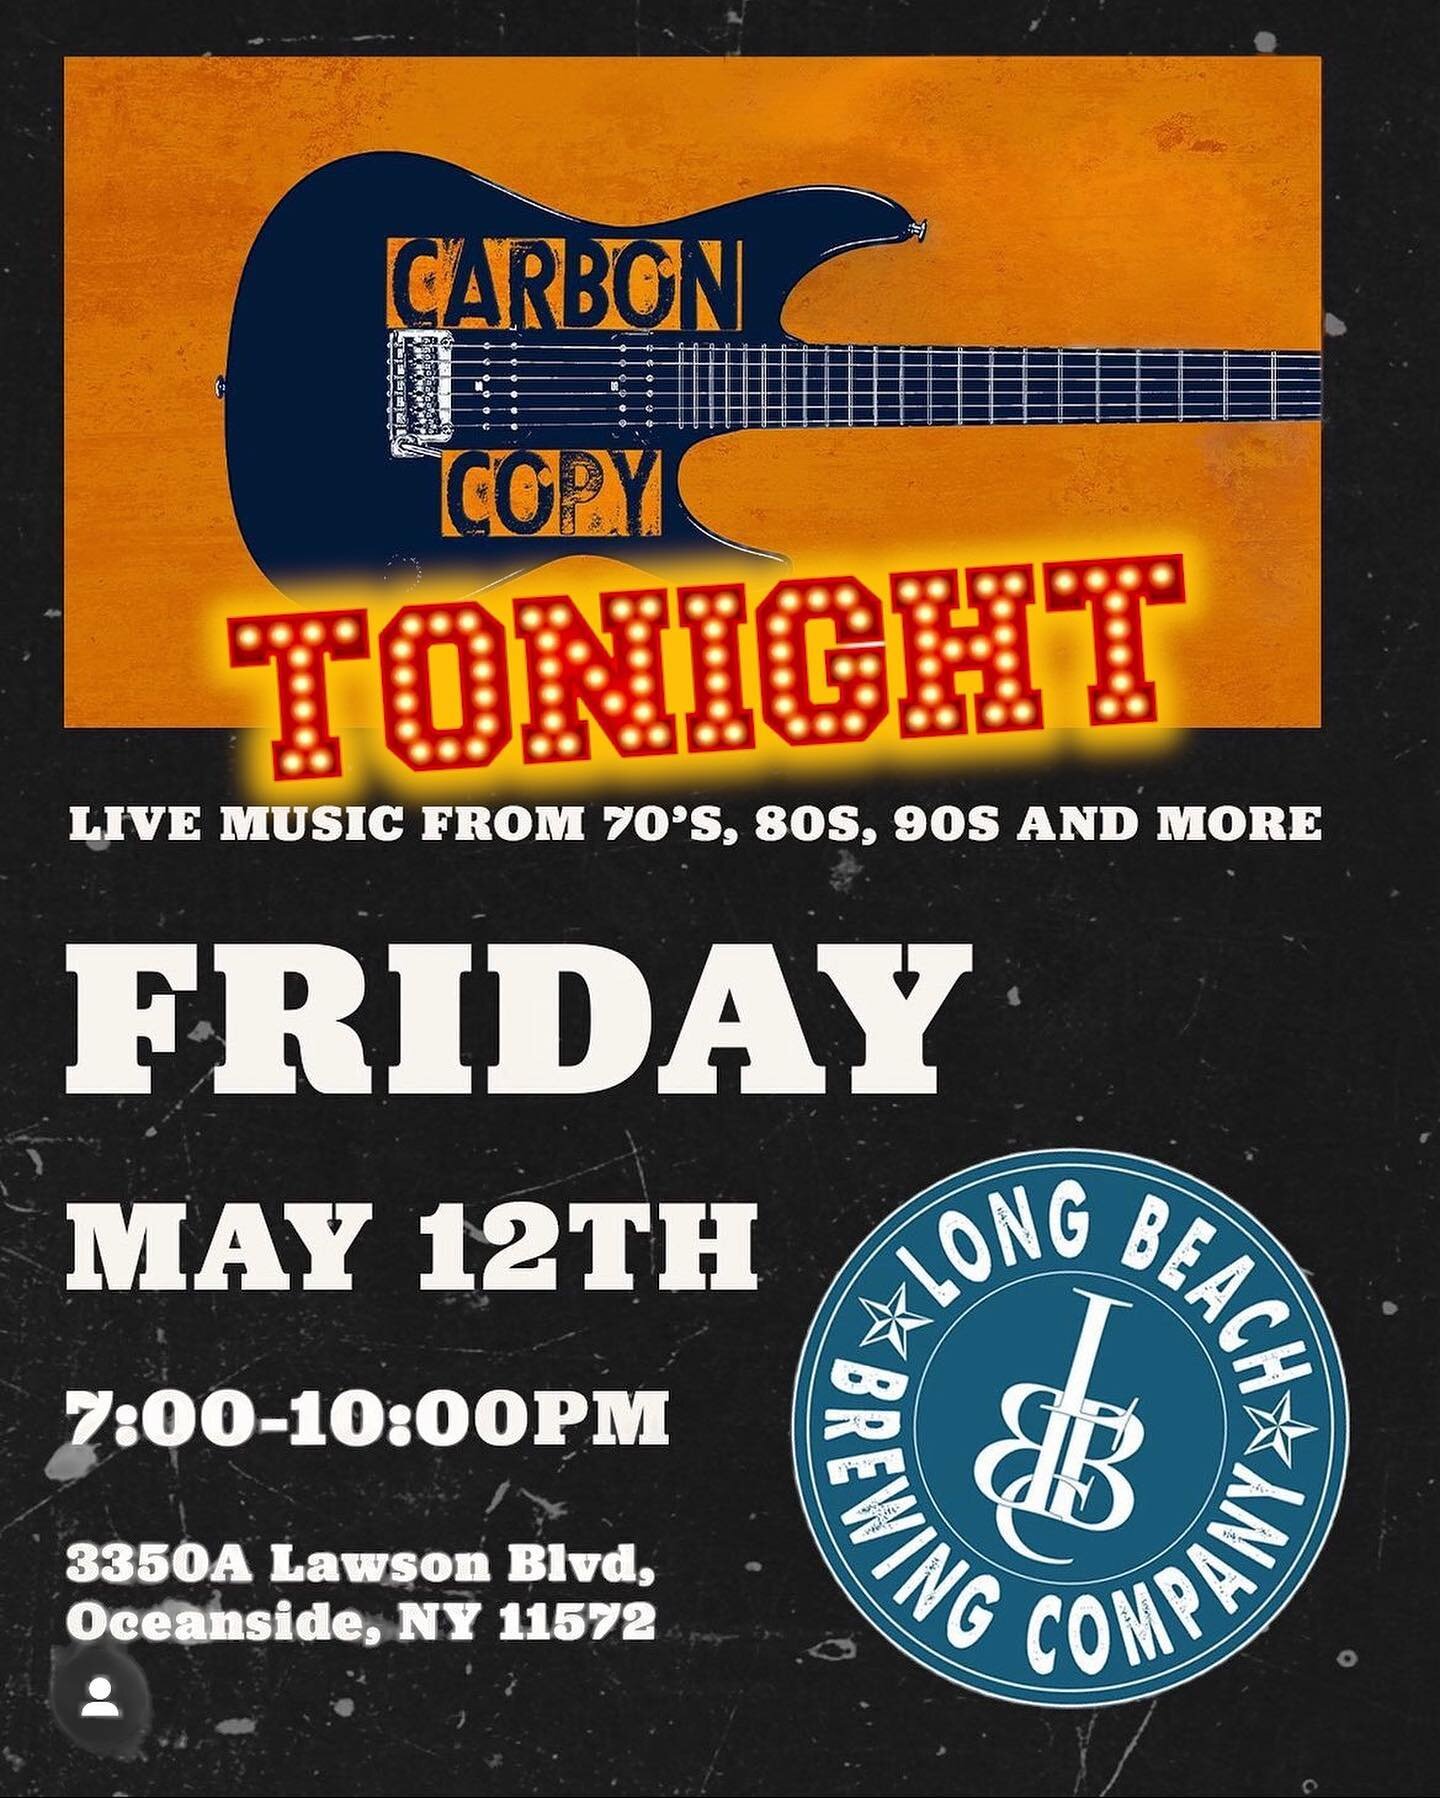 Tonight we have @carboncopymusicli 
from 7-10pm 
Doors open at 5pm today 
Happy hour from 5-7